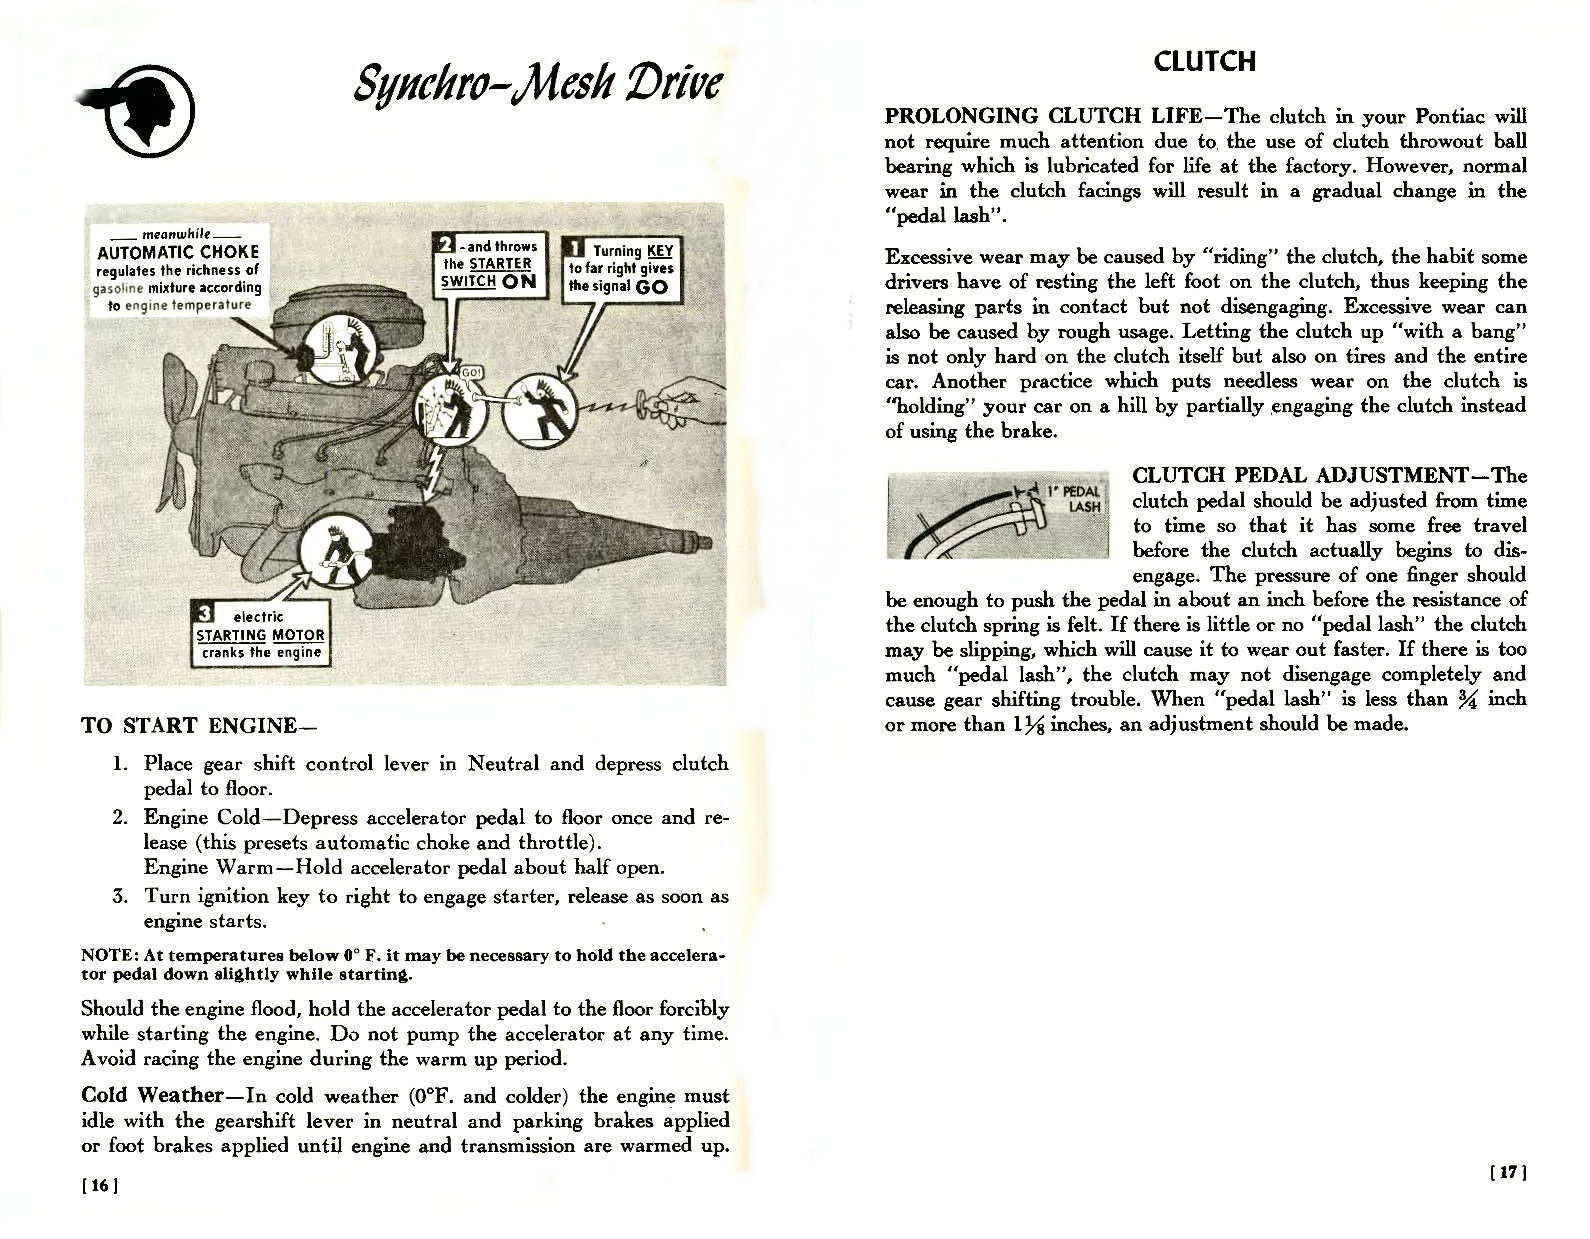 1957_Pontiac_Owners_Guide-16-17